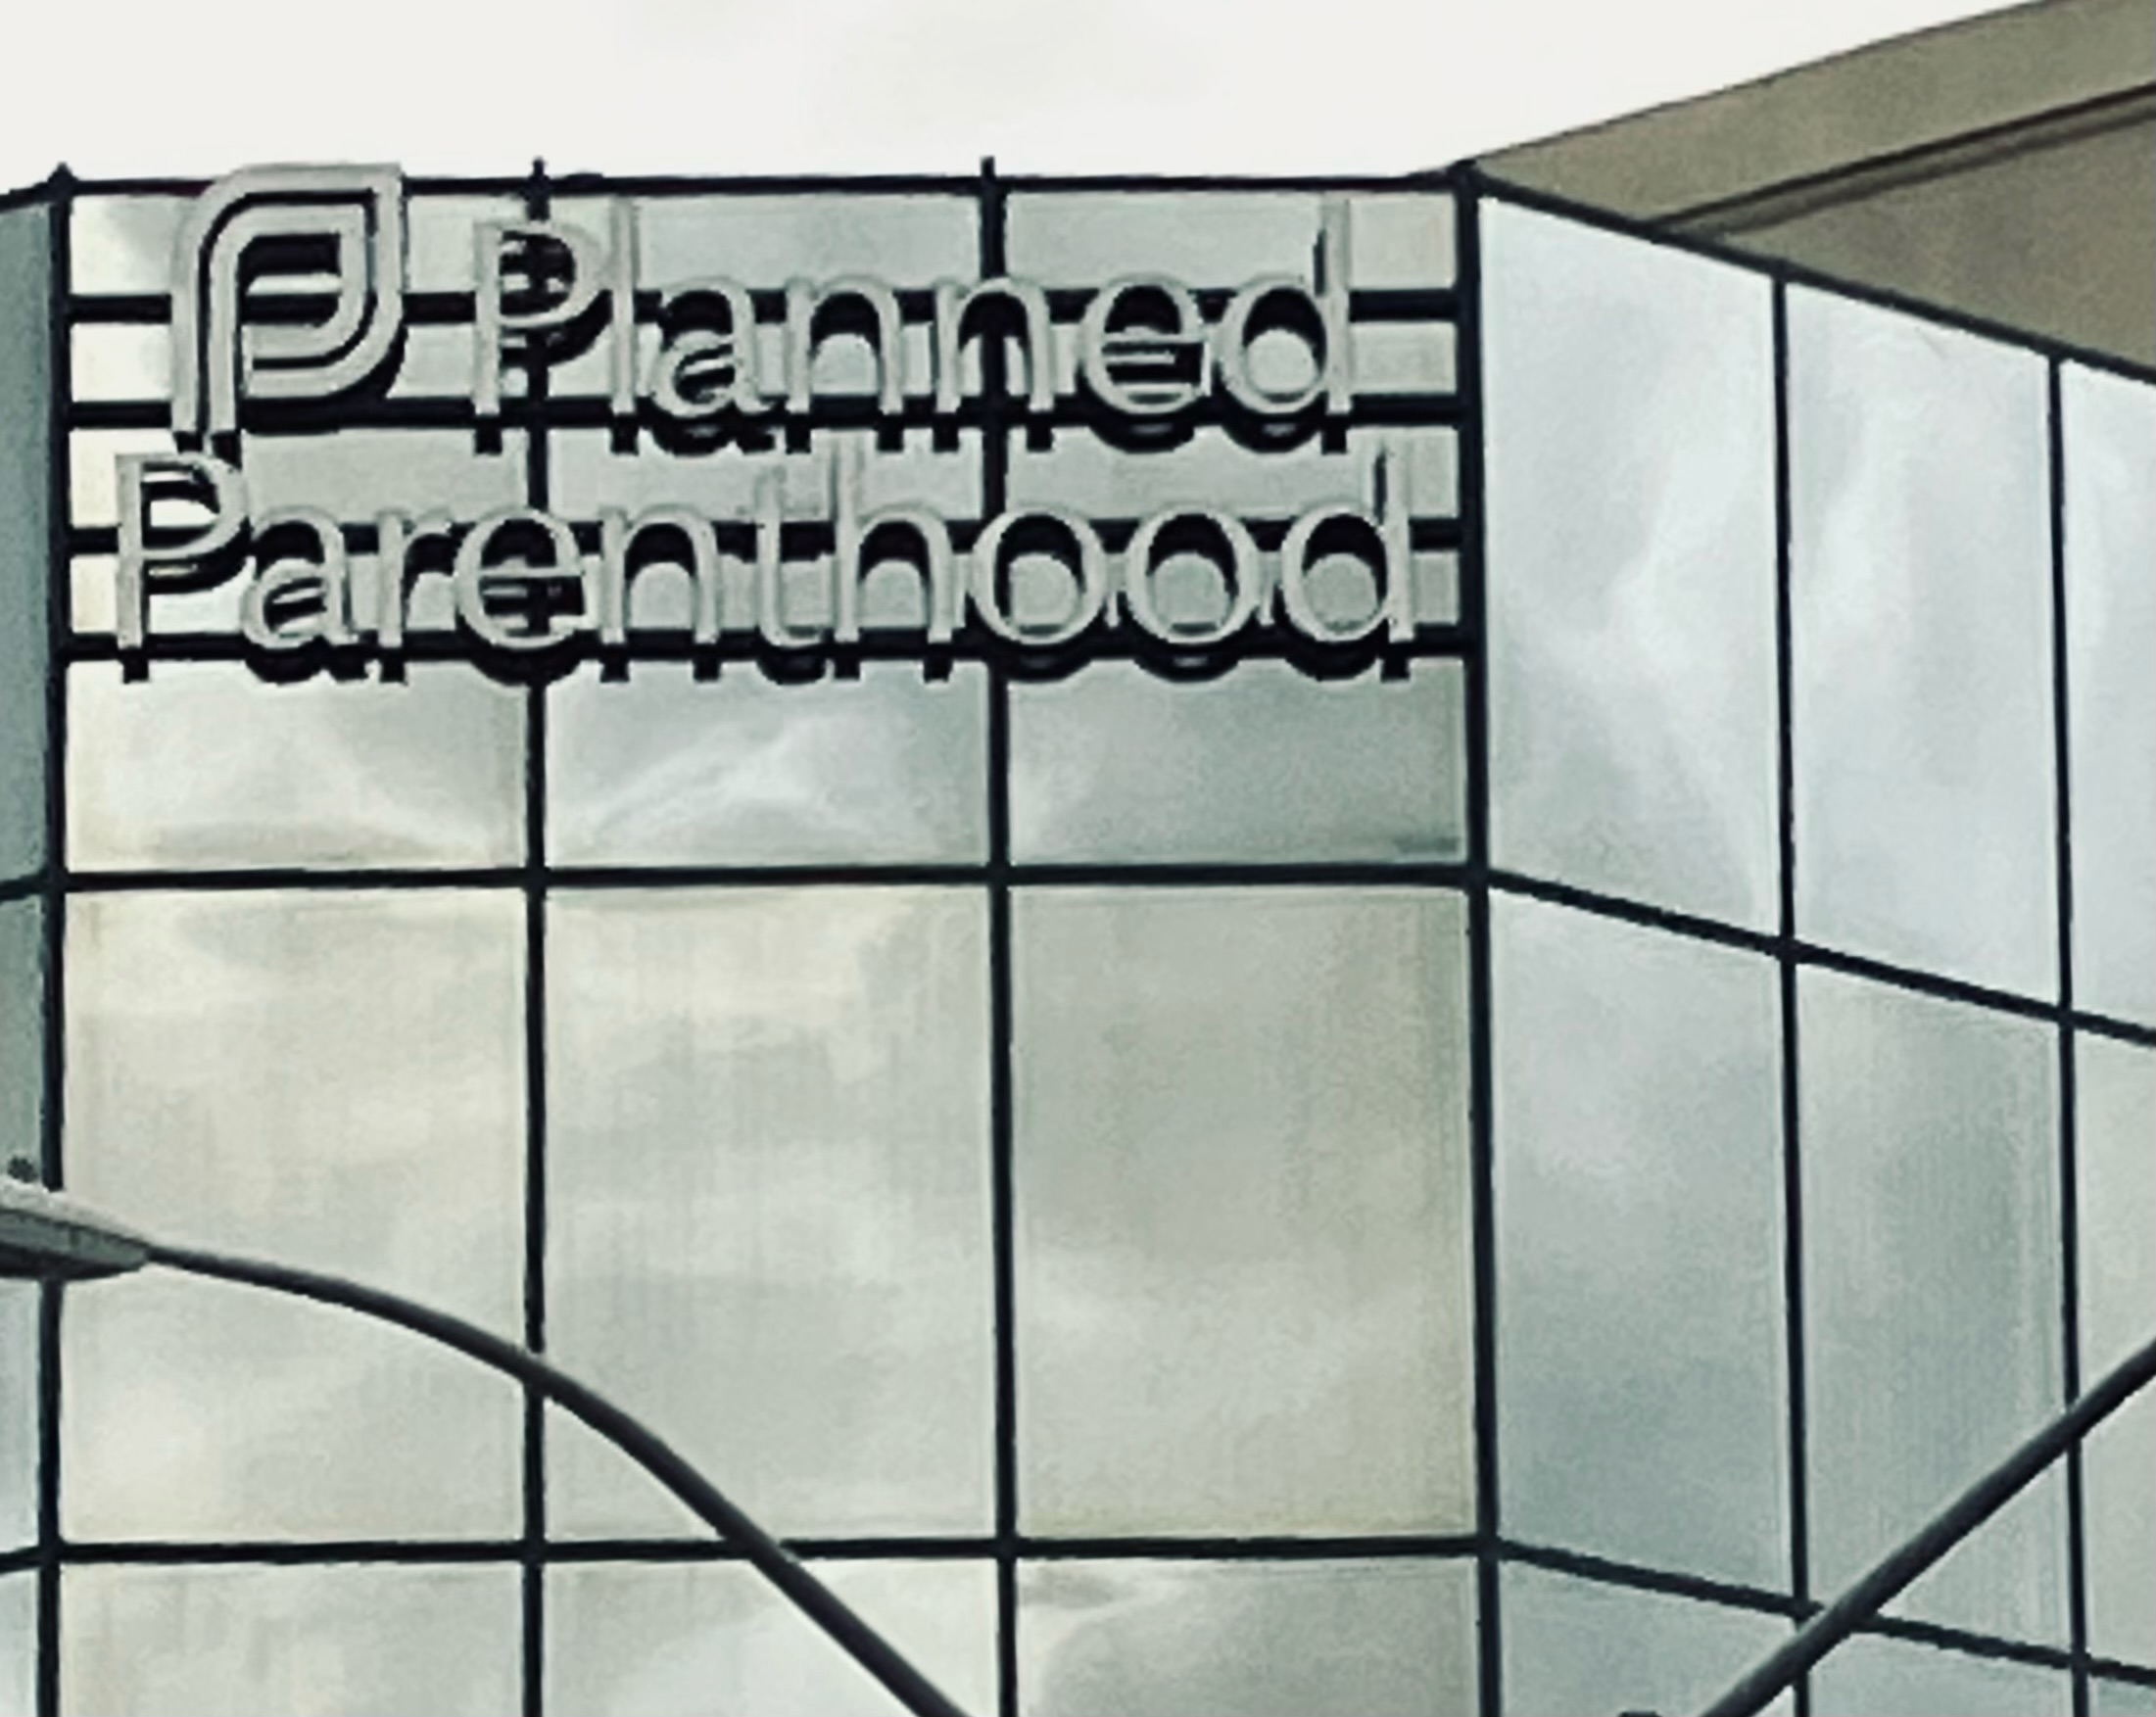 Corner of an all glass building with a Planned Parenthood sign